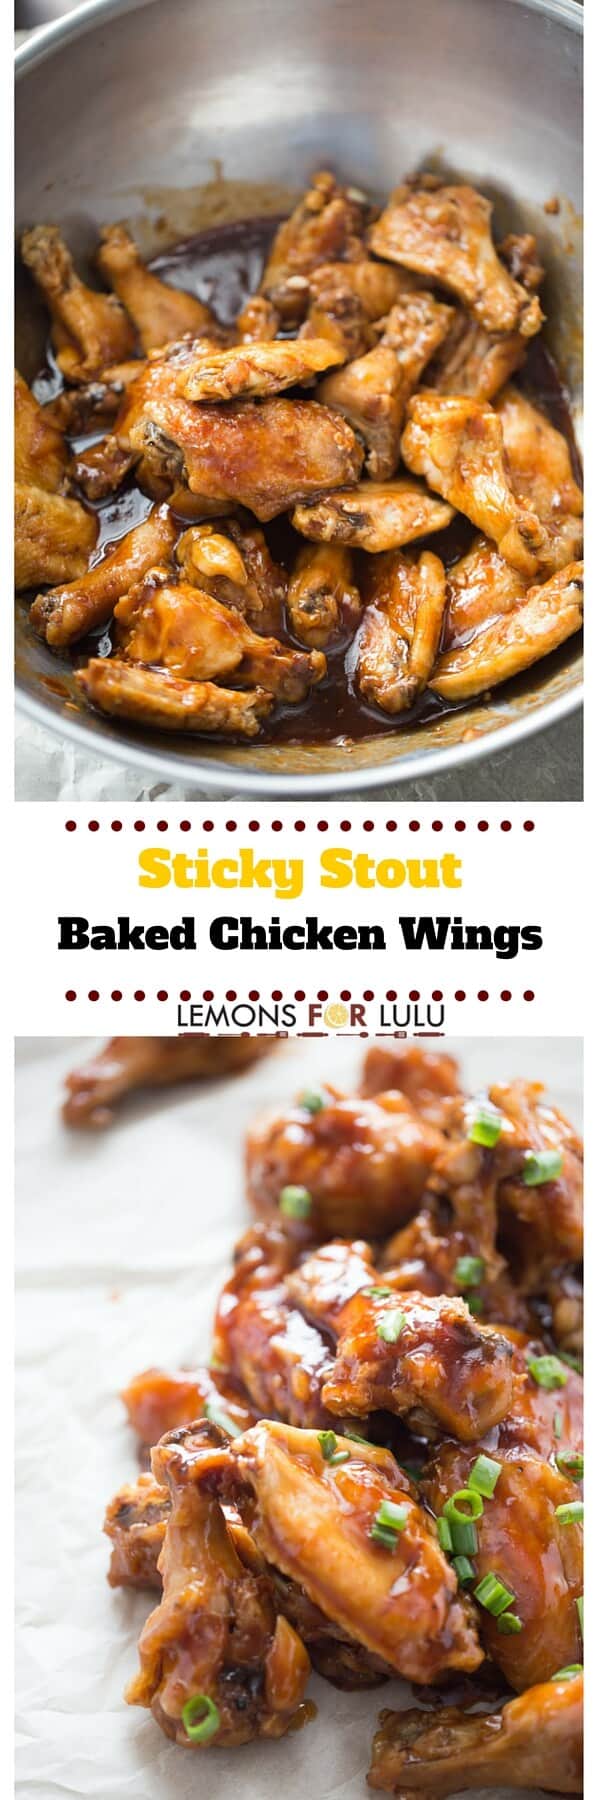 Nothing beats a good baked chicken wings recipe! This one here is a crowd pleaser! These easy baked wings are coated in a thick and rich stout and fig sauce that is so good, you'll want it on everything!